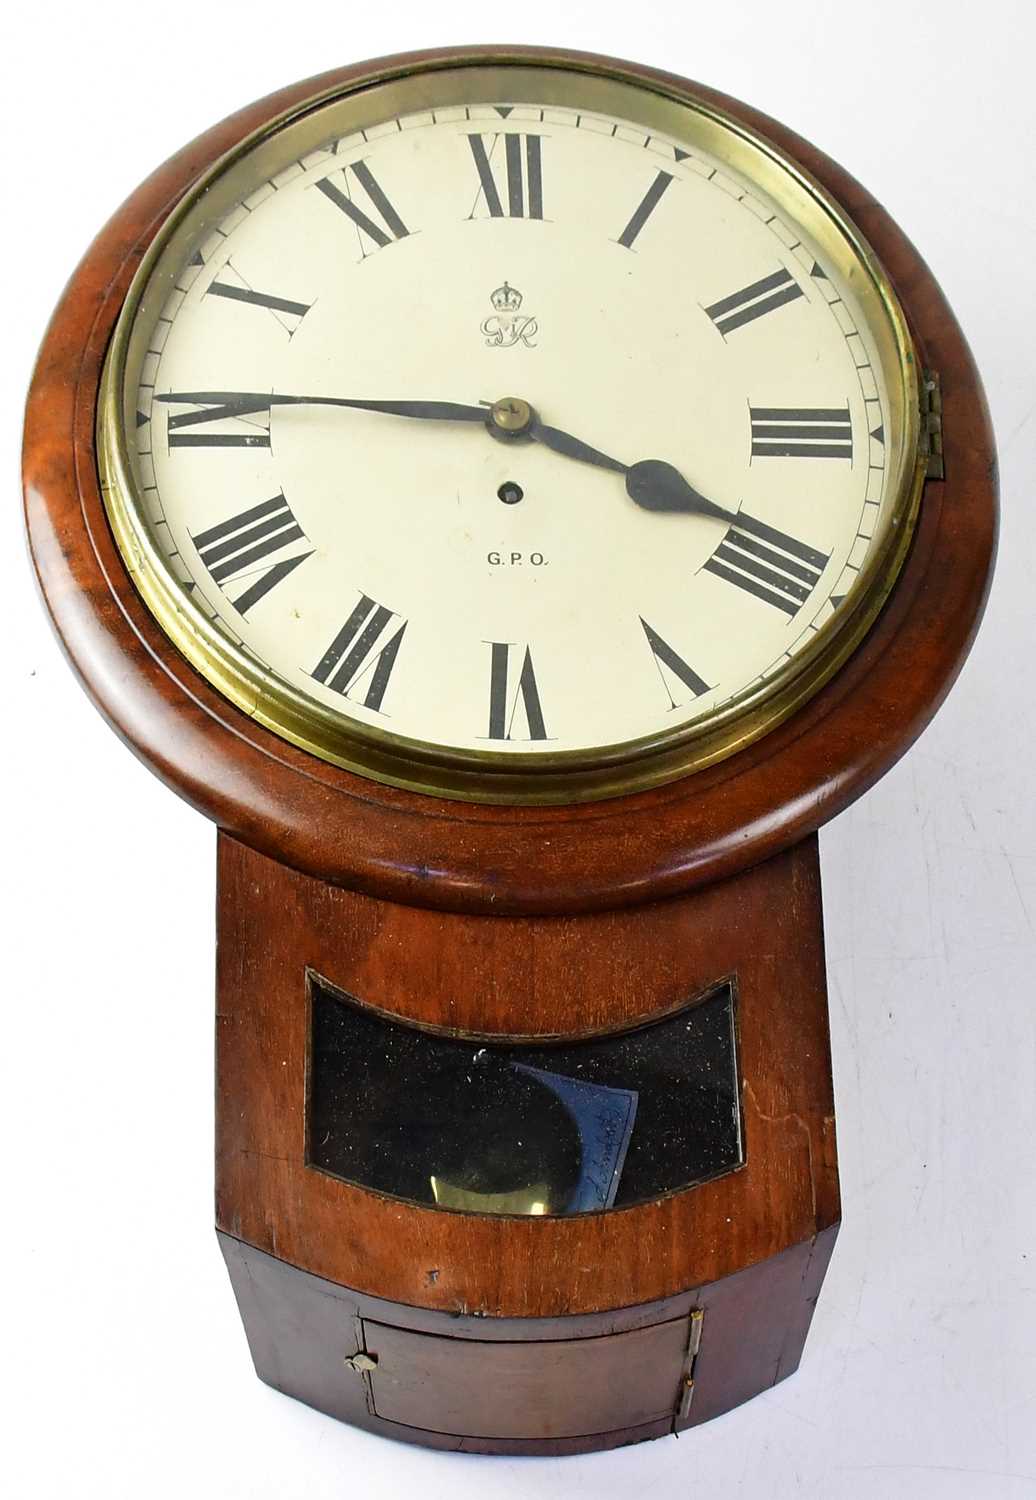 A walnut cased G.P.O. drop-dial wall clock with GR VI below crown cipher, the dial set with Roman